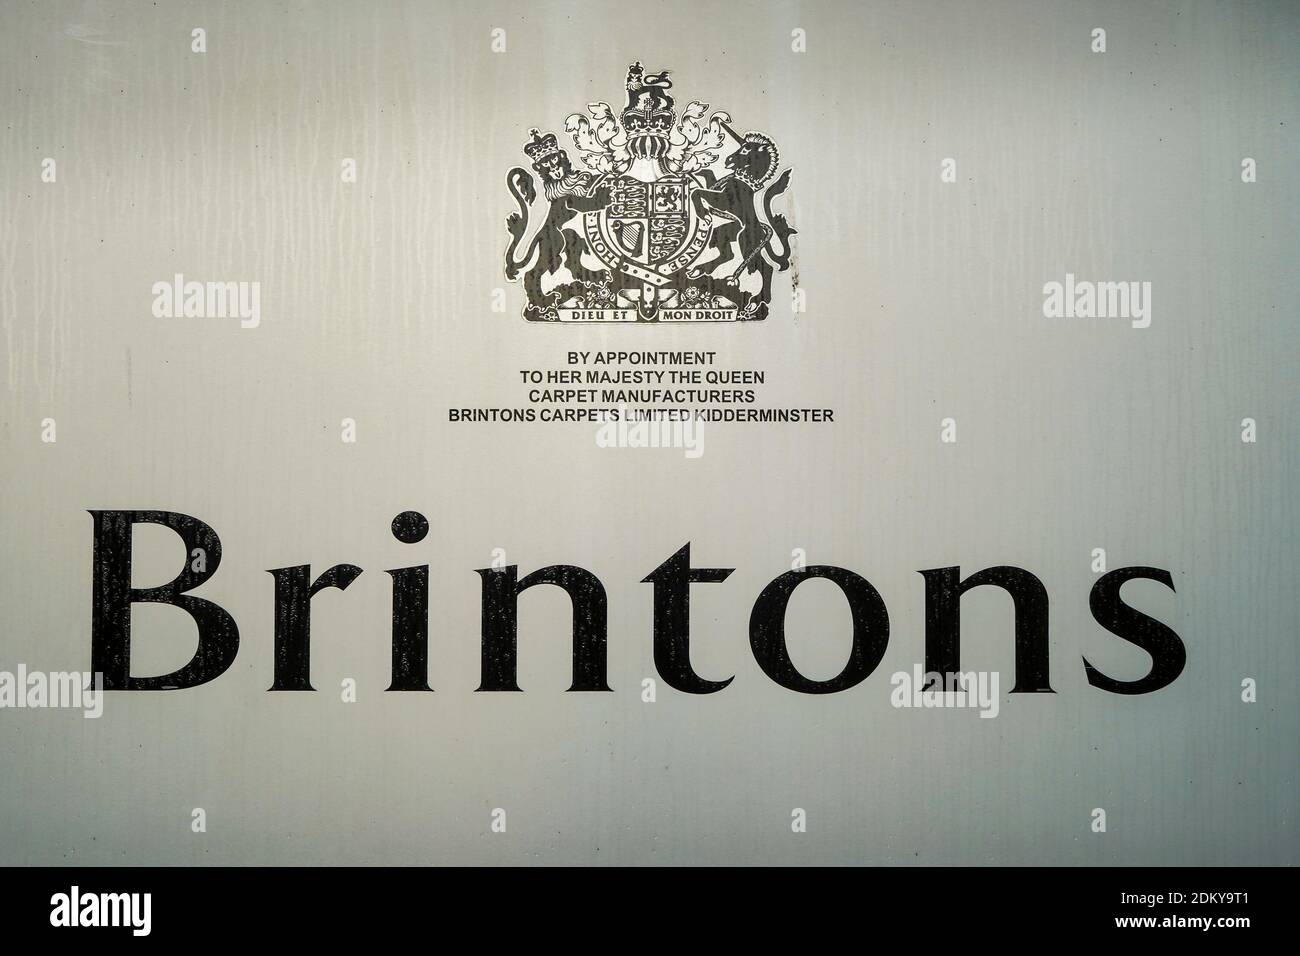 Brintons Carpets, Kidderminster UK. Isolated plaque sign on building showing royal seal of approval/ great seal of realm. British carpet manufacturing. Stock Photo